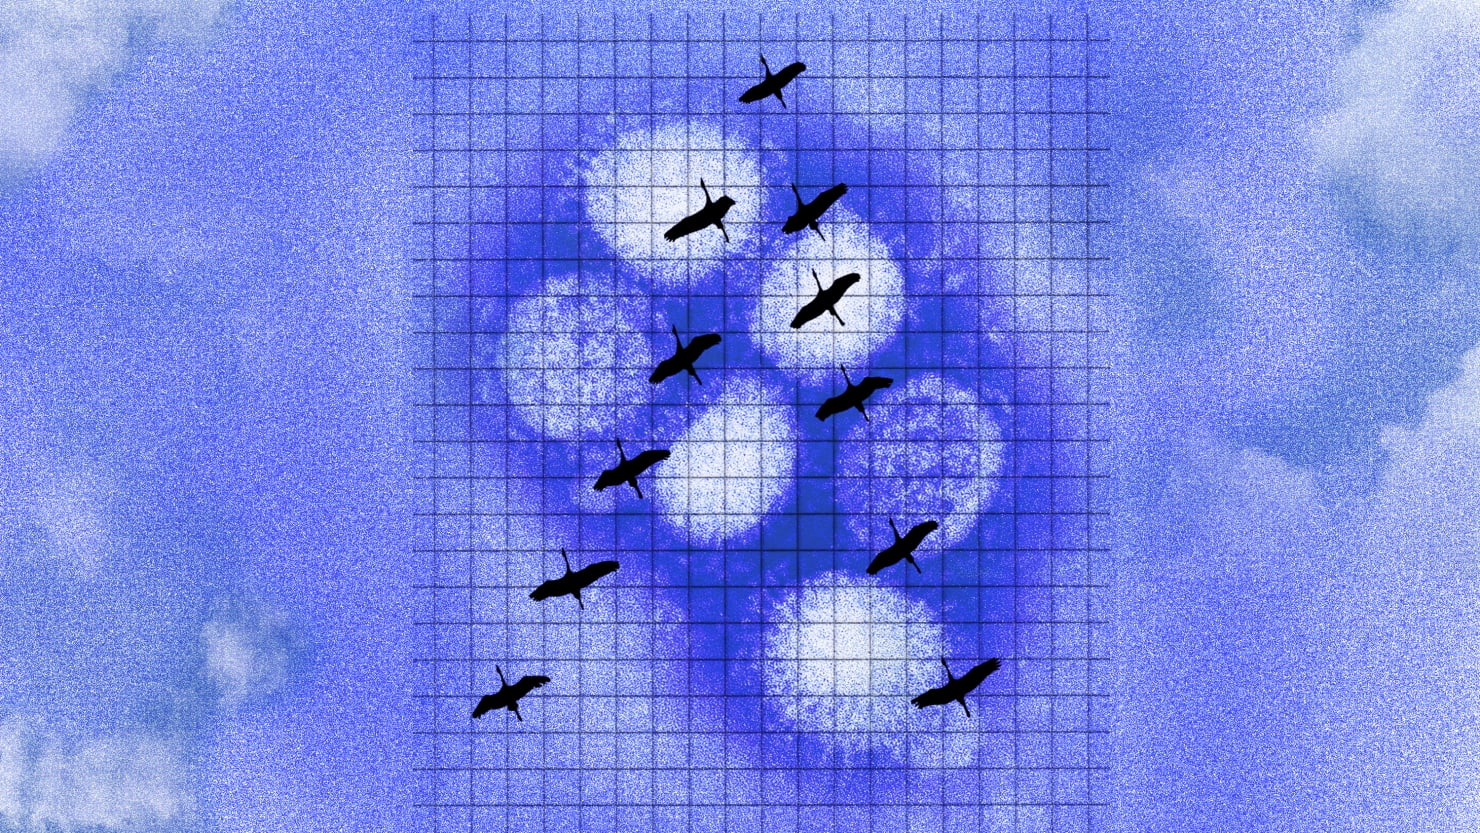 Scientists Fear Bird Flu Surge as Billions of Birds Start to Fly Home - The Daily Beast